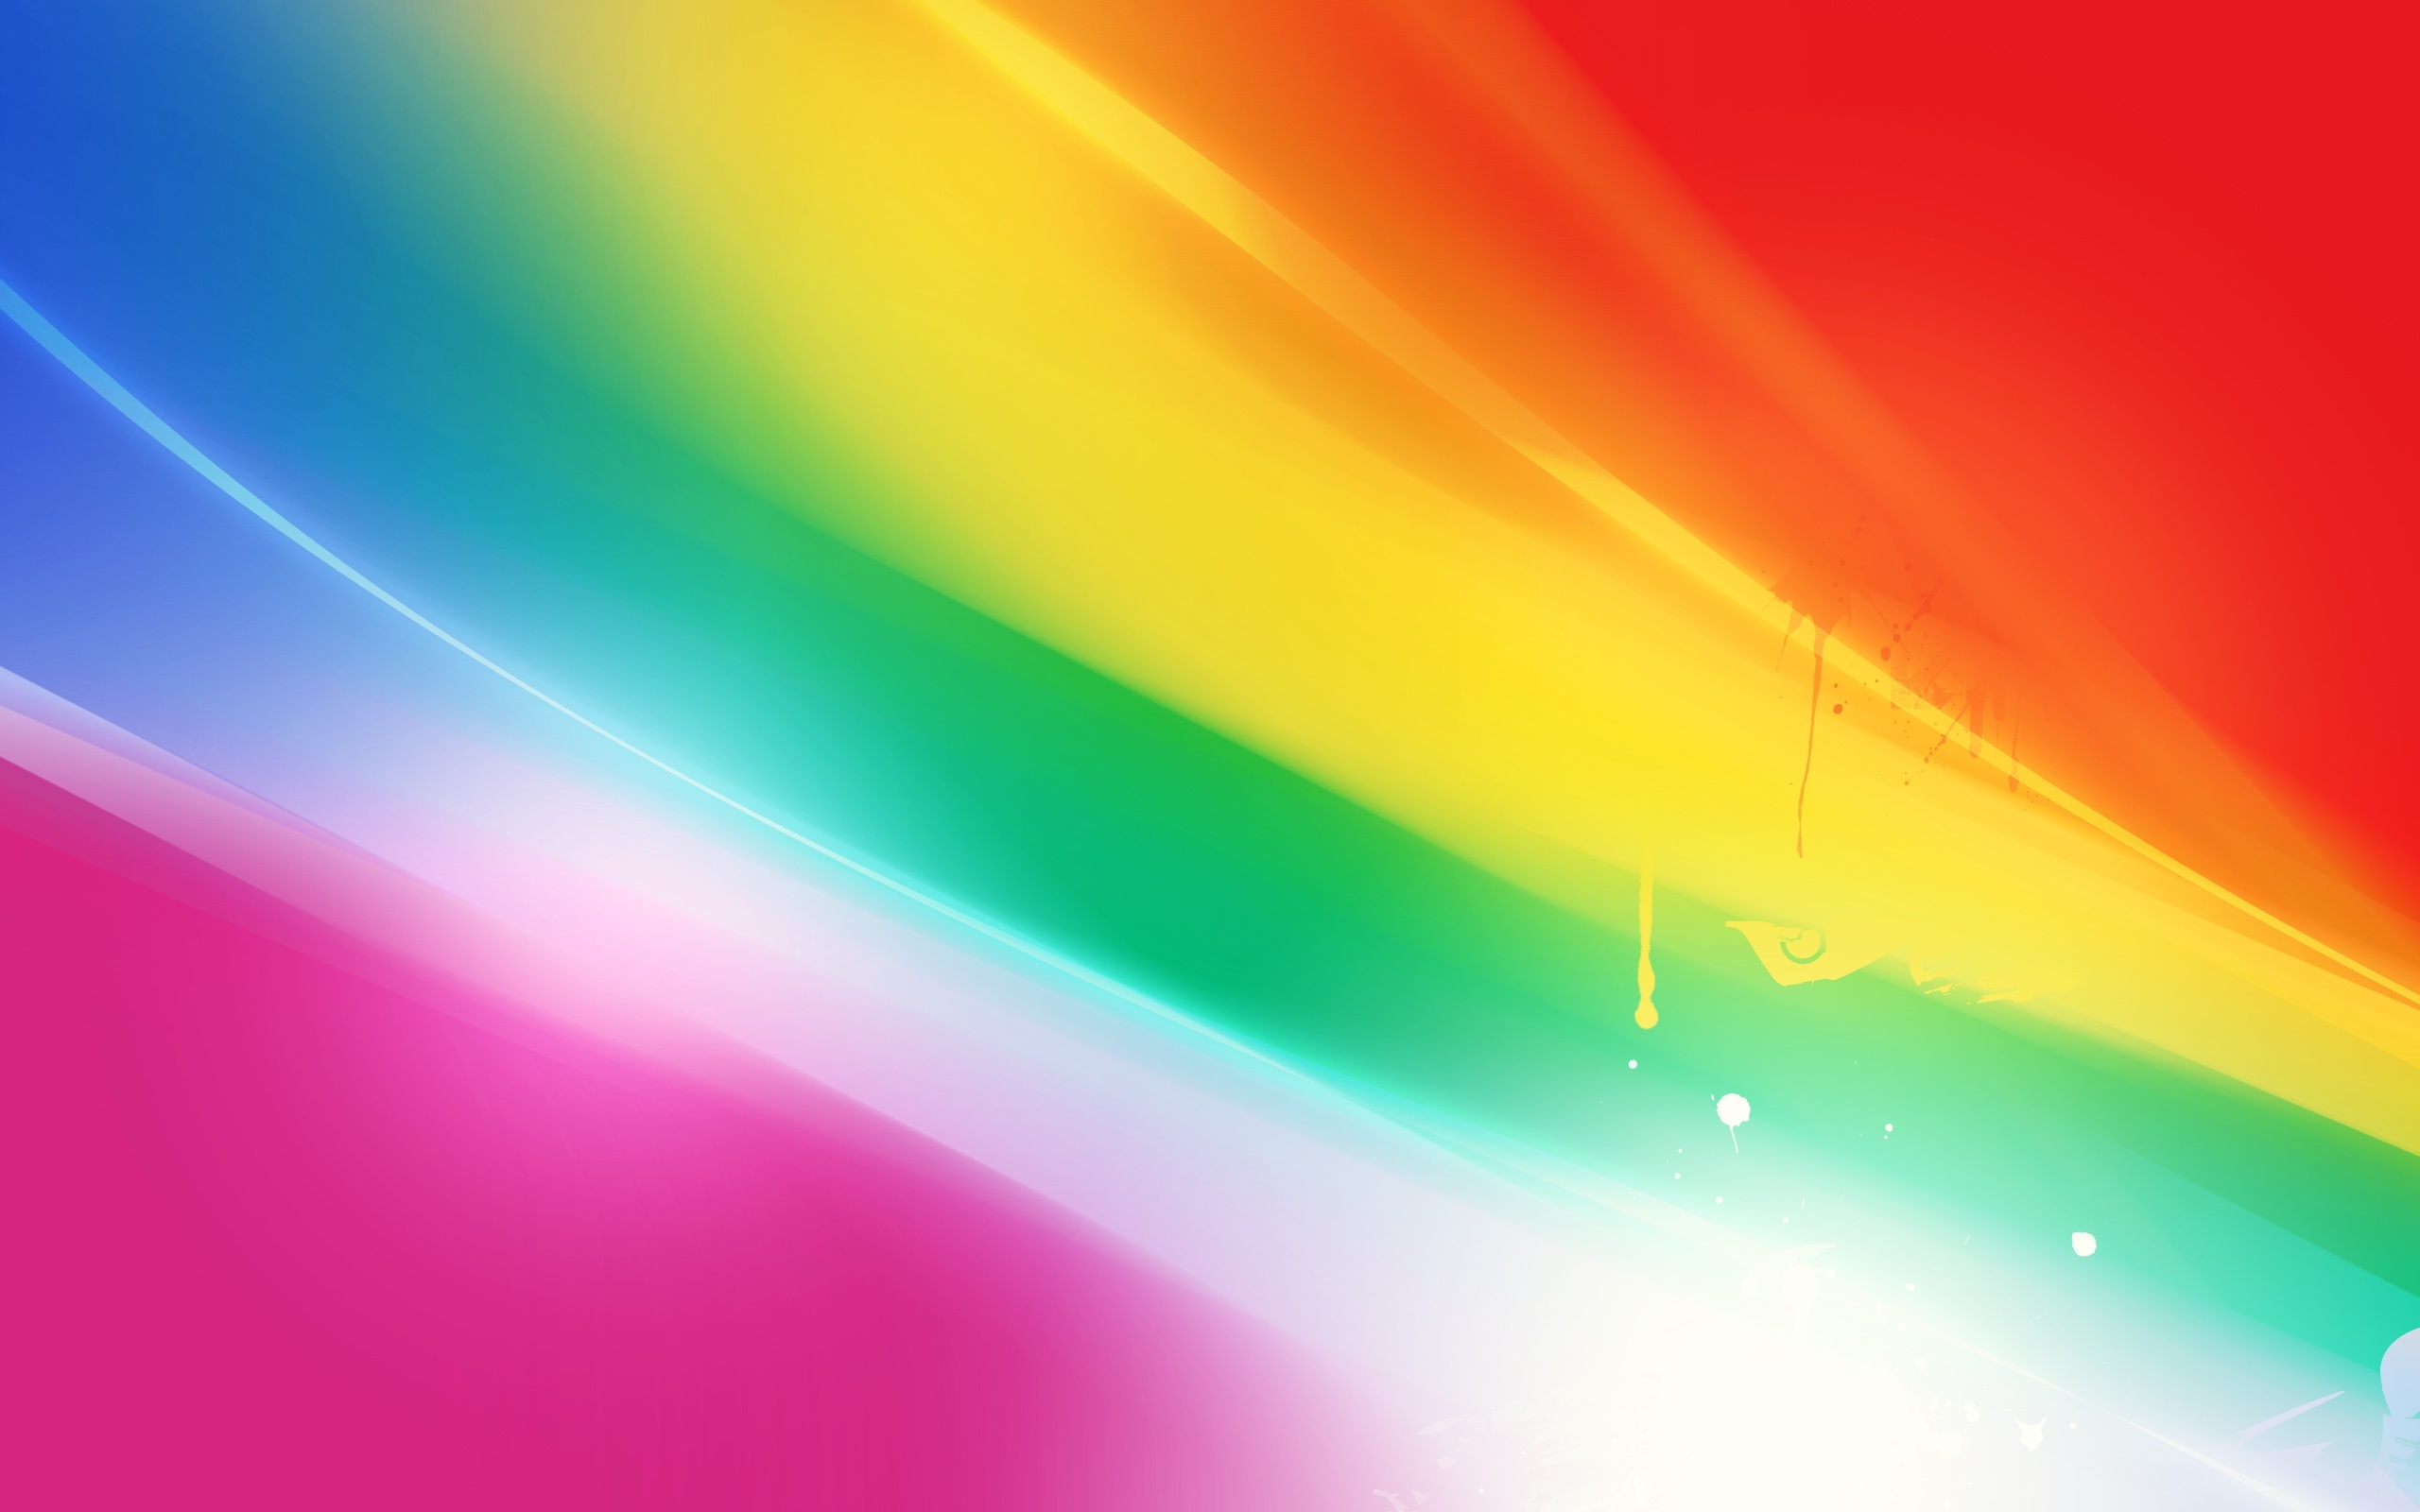 Colorful Abstract Background 8684 2560 x 1600